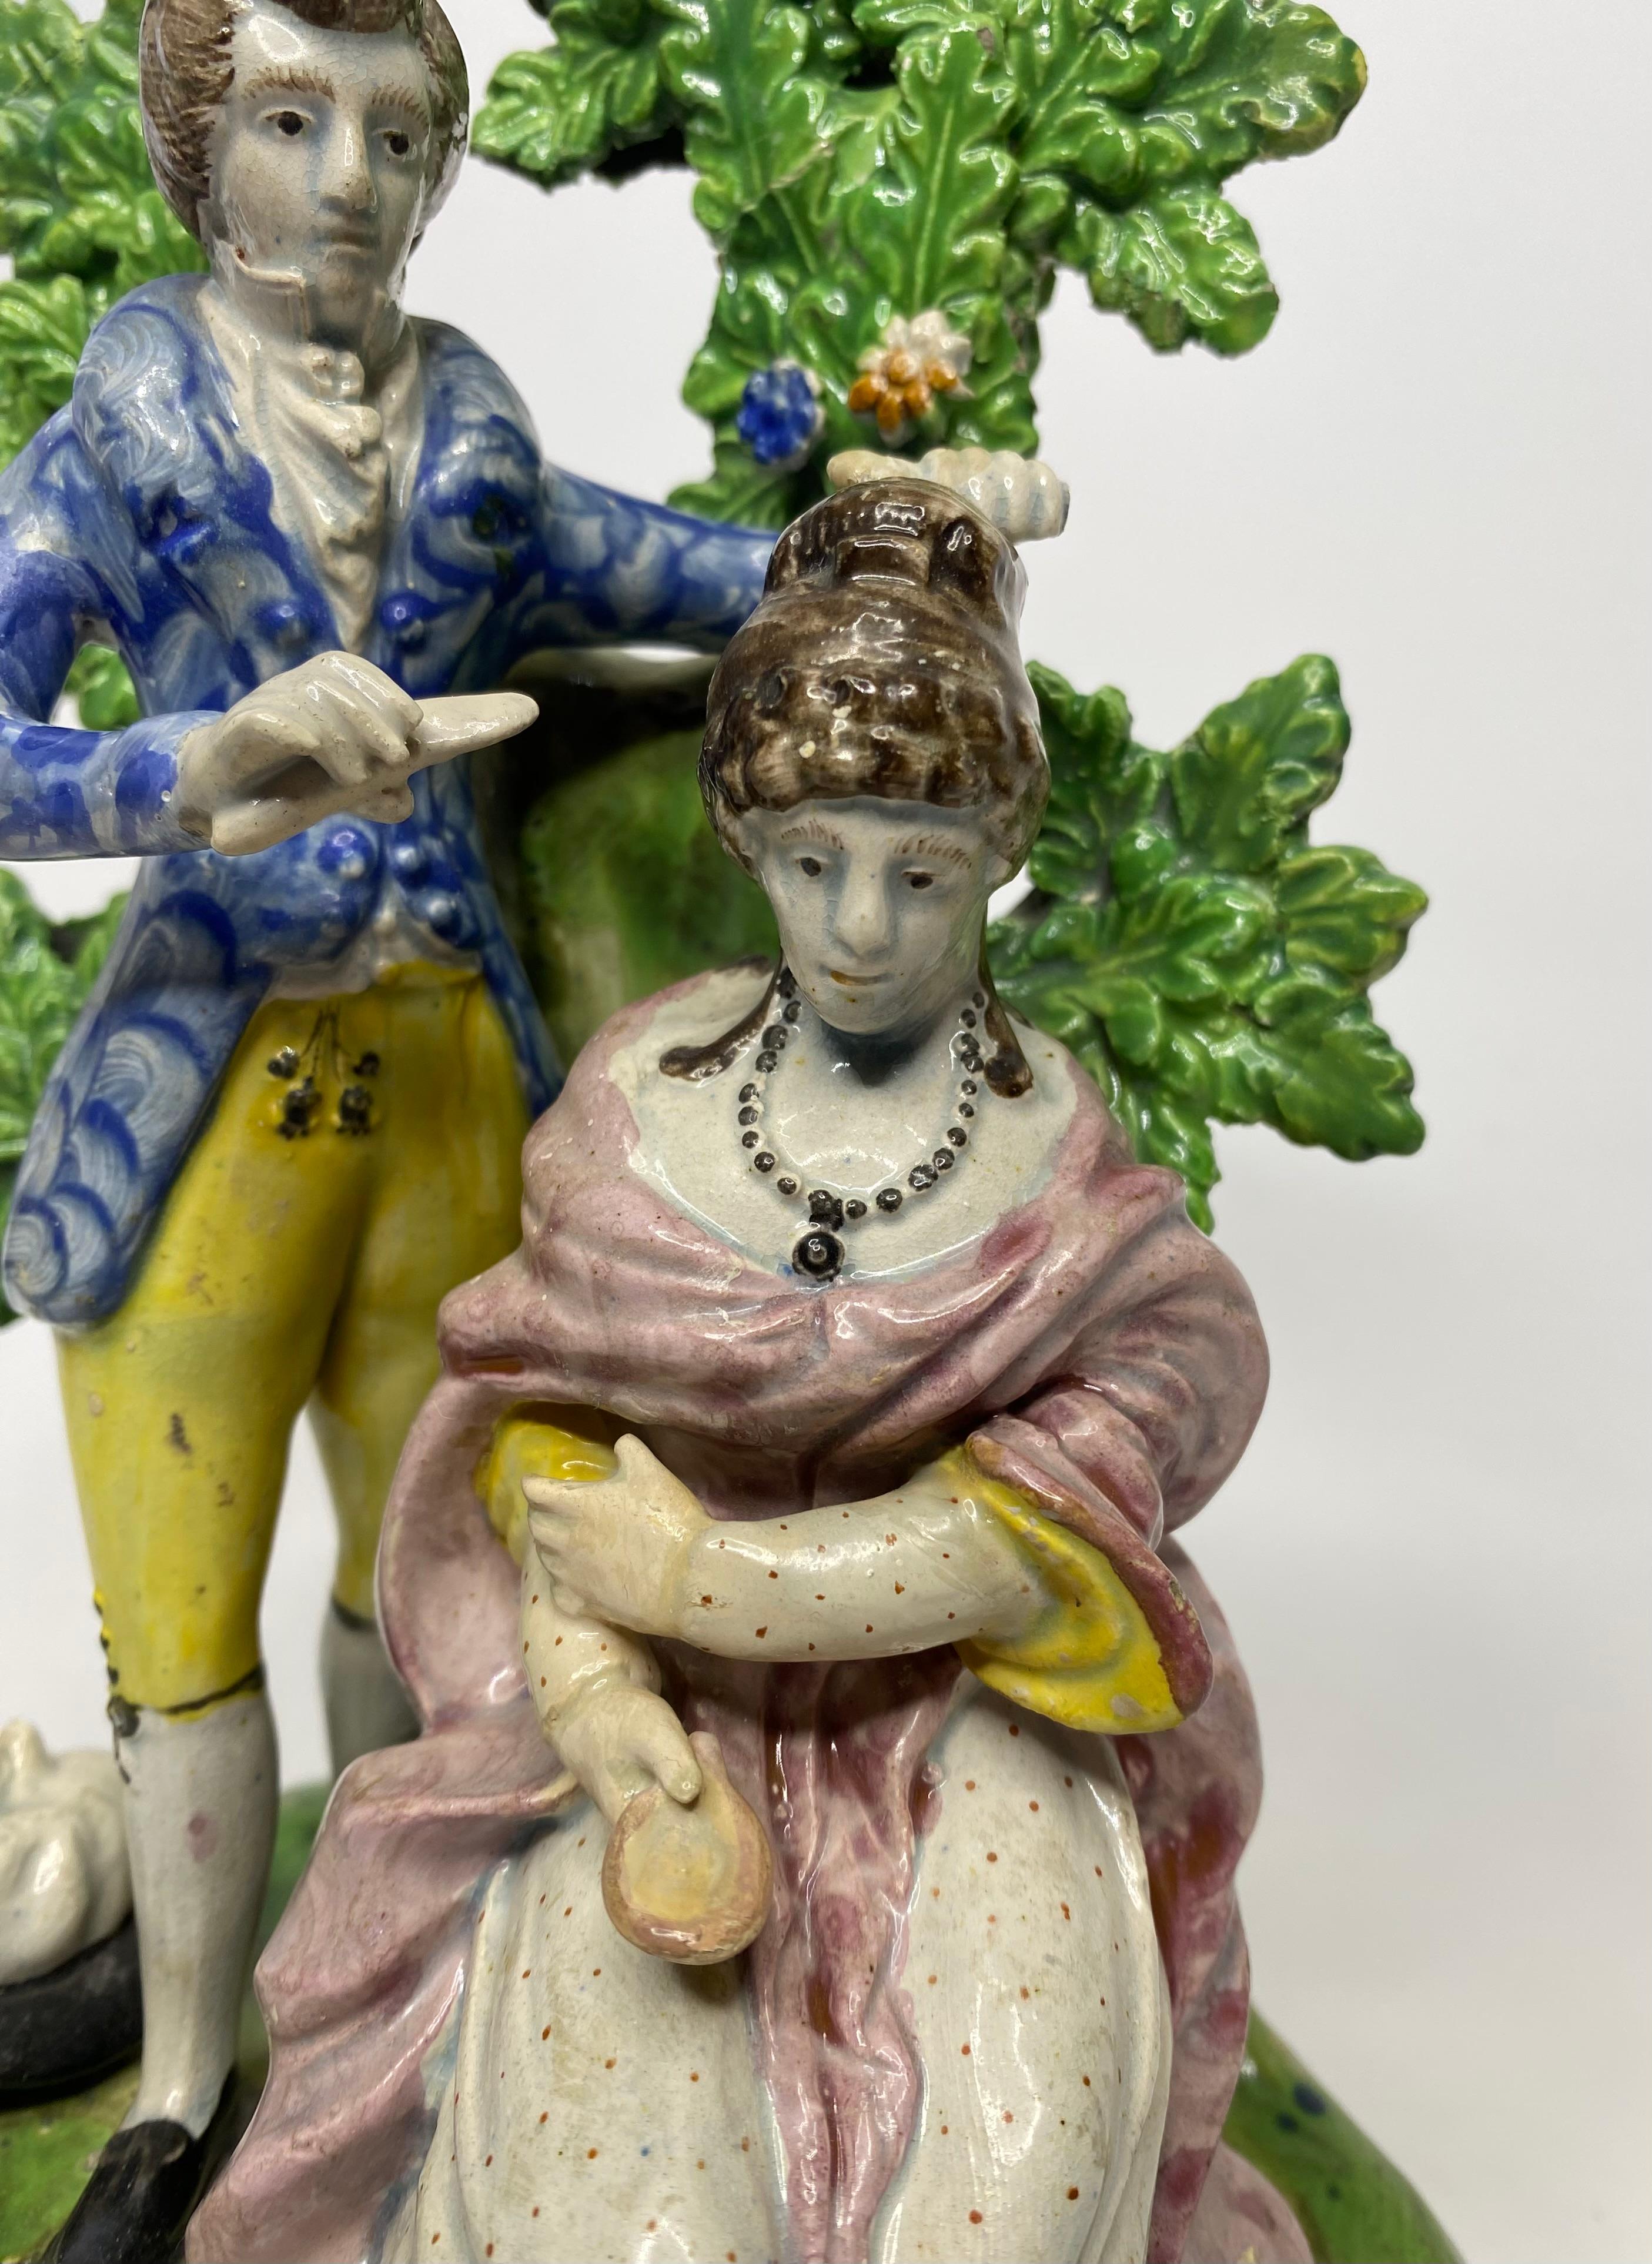 Fired Staffordshire pottery bocage group, ‘Hairdresser’, c. 1820. For Sale